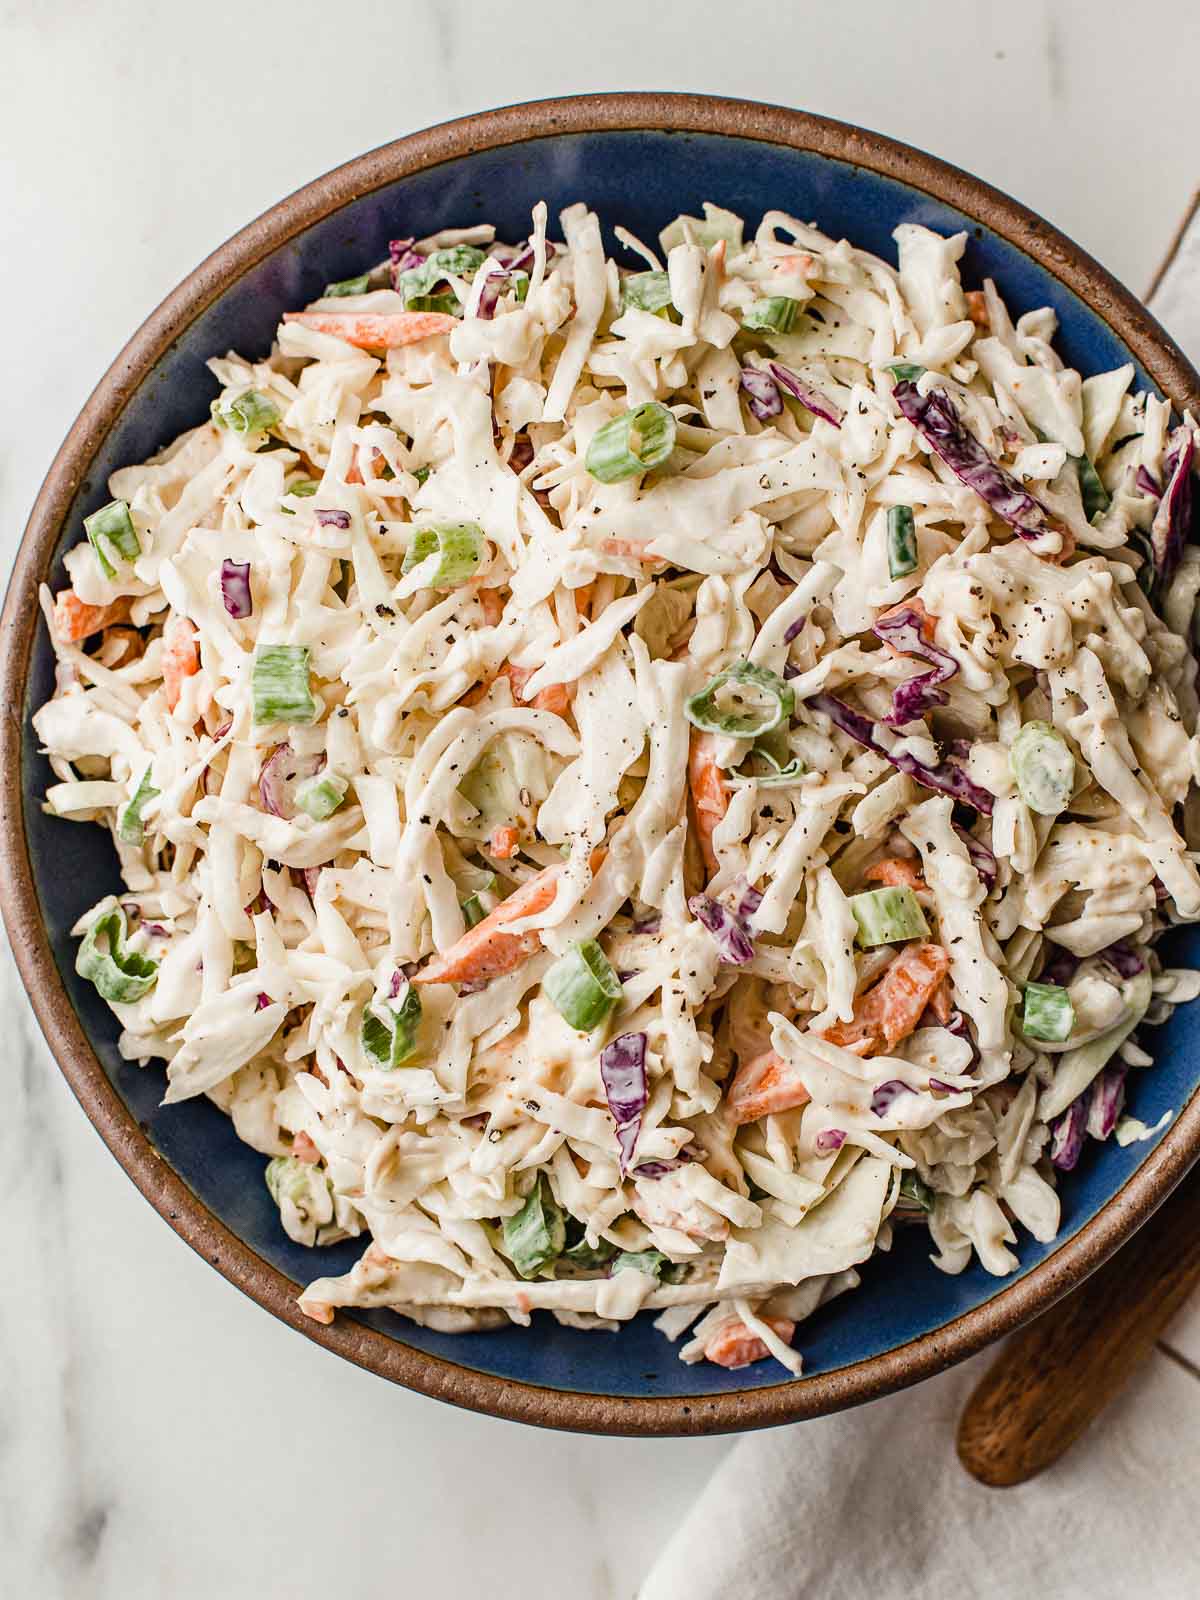 Low carb coleslaw in a bowl.